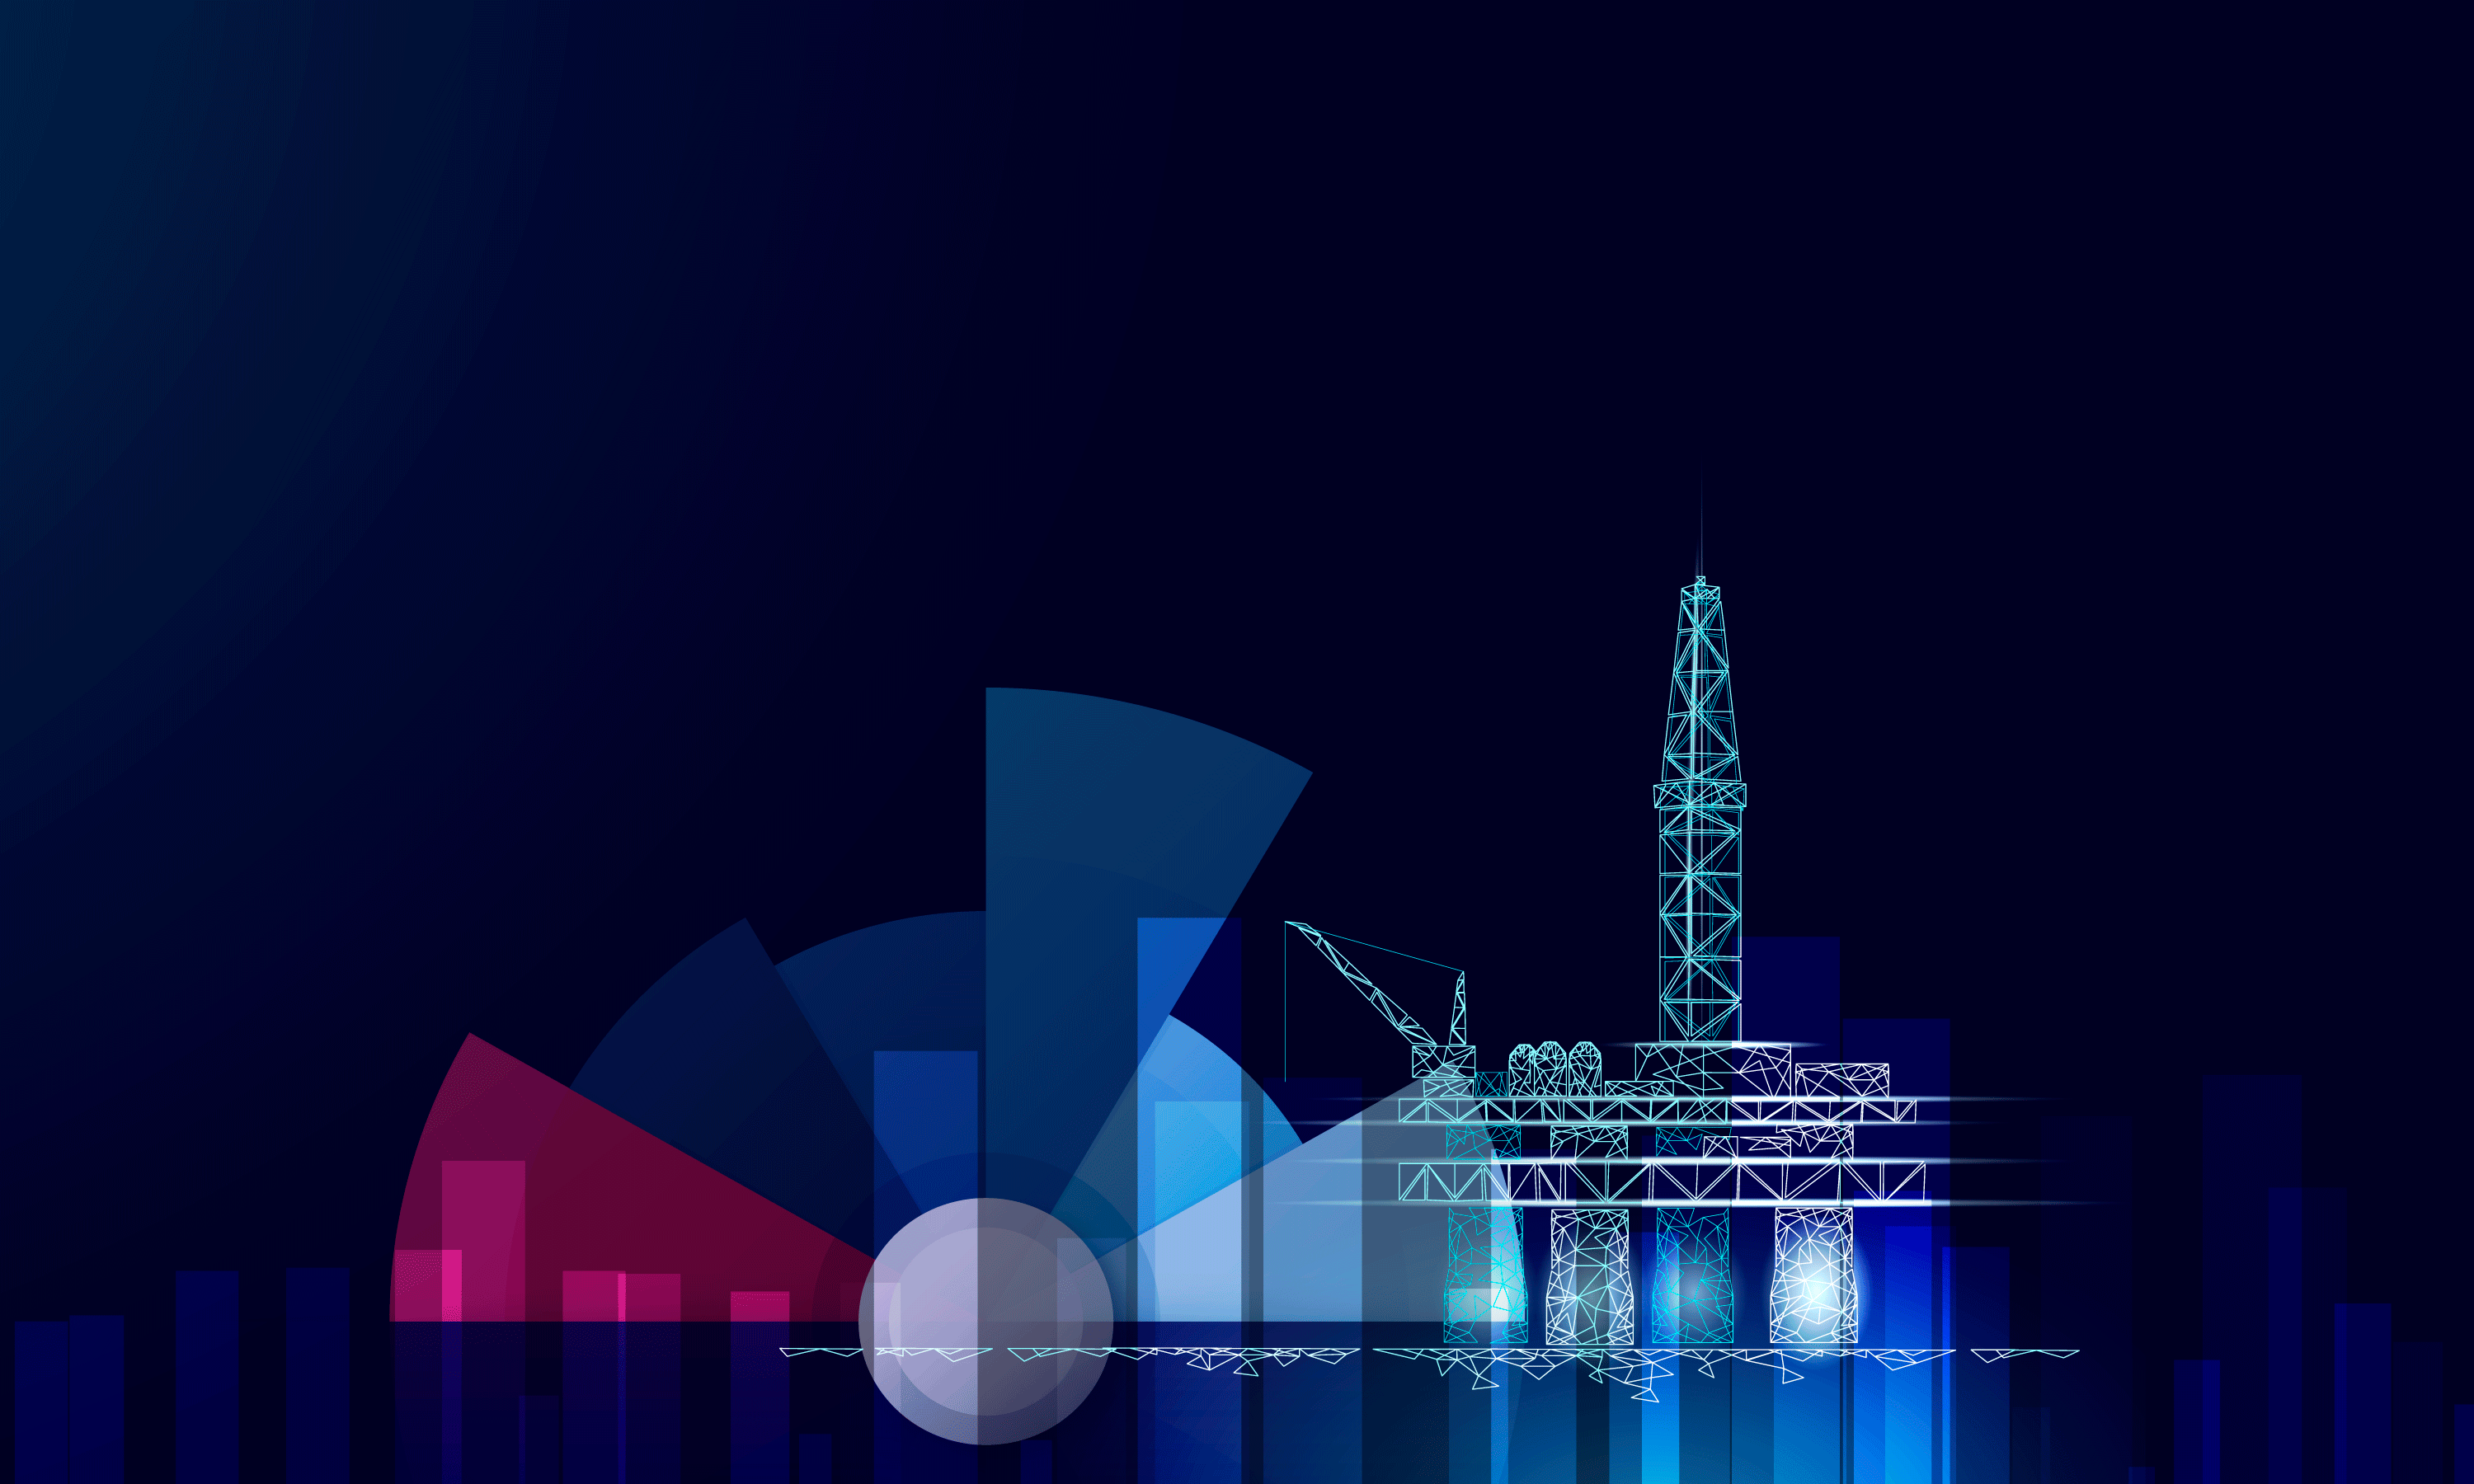 Weekly Global Offshore Rig Counts